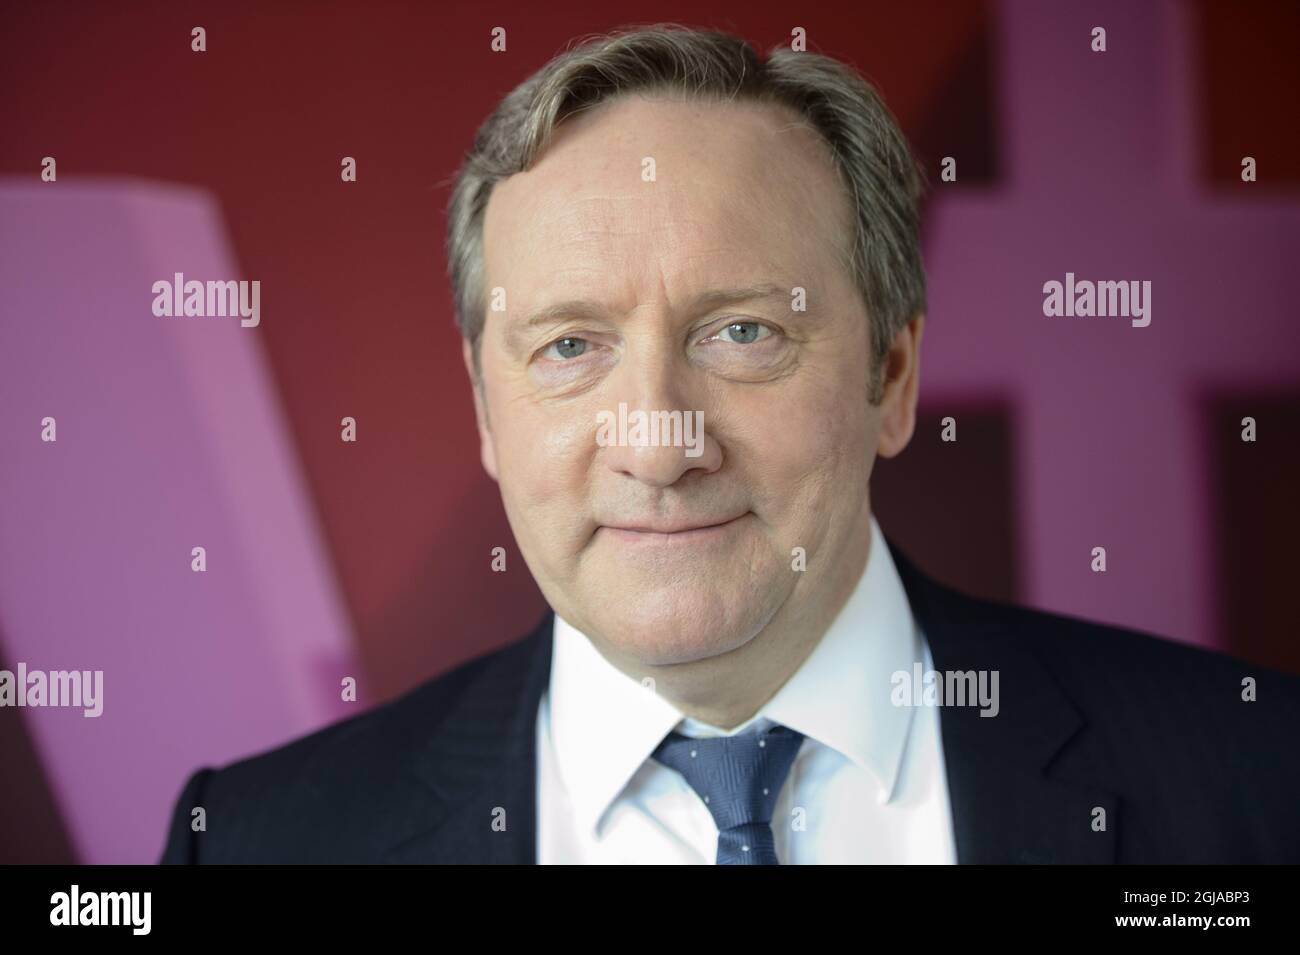 STOCKHOLM 2016-11-24 Neil Dudgeon is seen during his visit to Stockholm, Sweden, November 24, 2016. Neil Dudgeon stars as Chief Inspector John Barnaby in the television crime series Â“Midsomer MurdersÂ” which celebrates its 20th anniversary. Foto: Henrik Montgomery / TT / kod 10060  Stock Photo